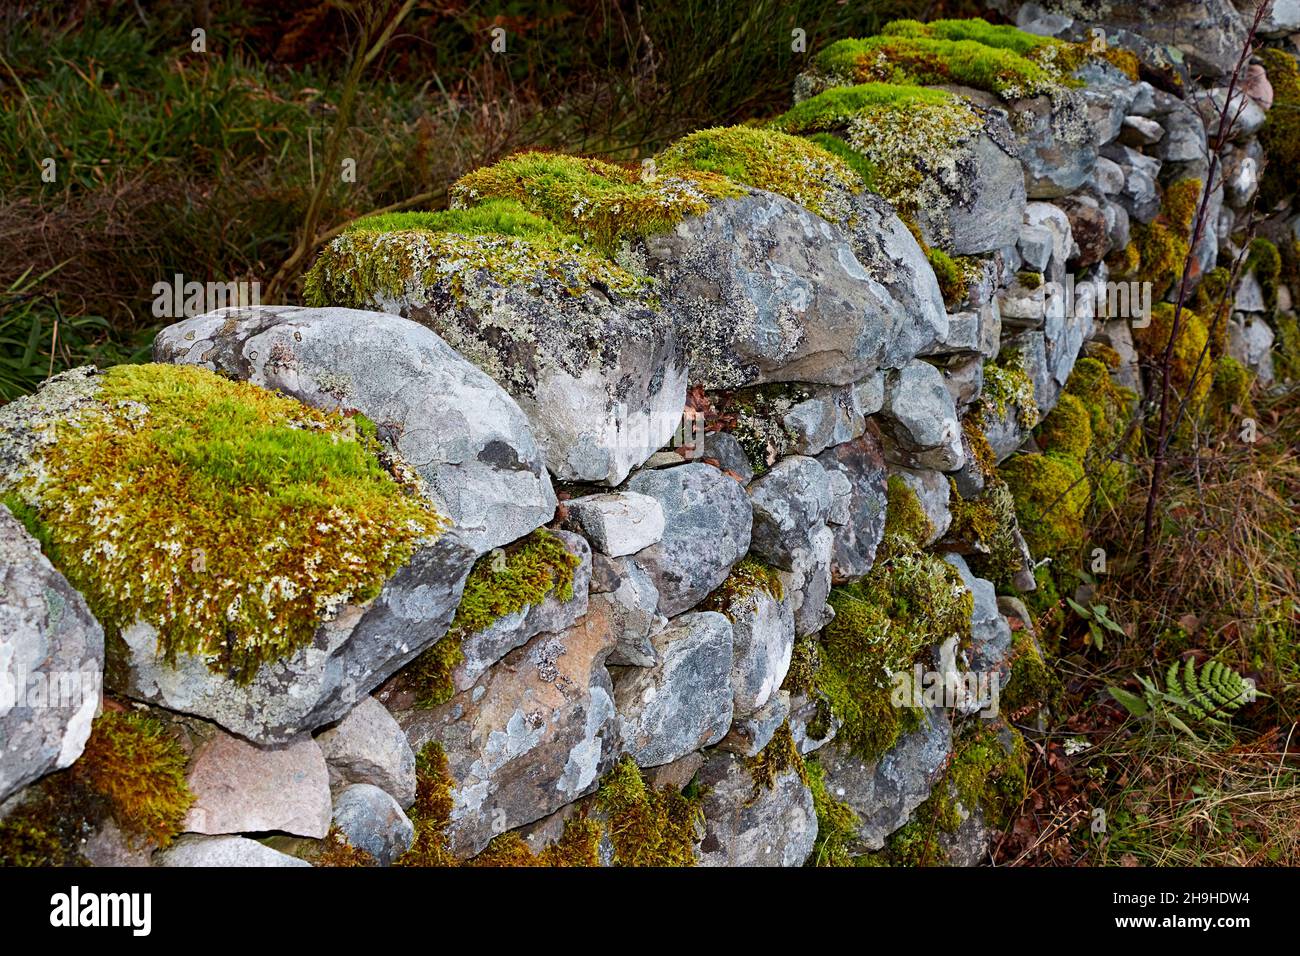 GROWTHS OF MOSS Bryophyta GROWING ON LICHEN COVERED STONES IN A WALL Stock Photo